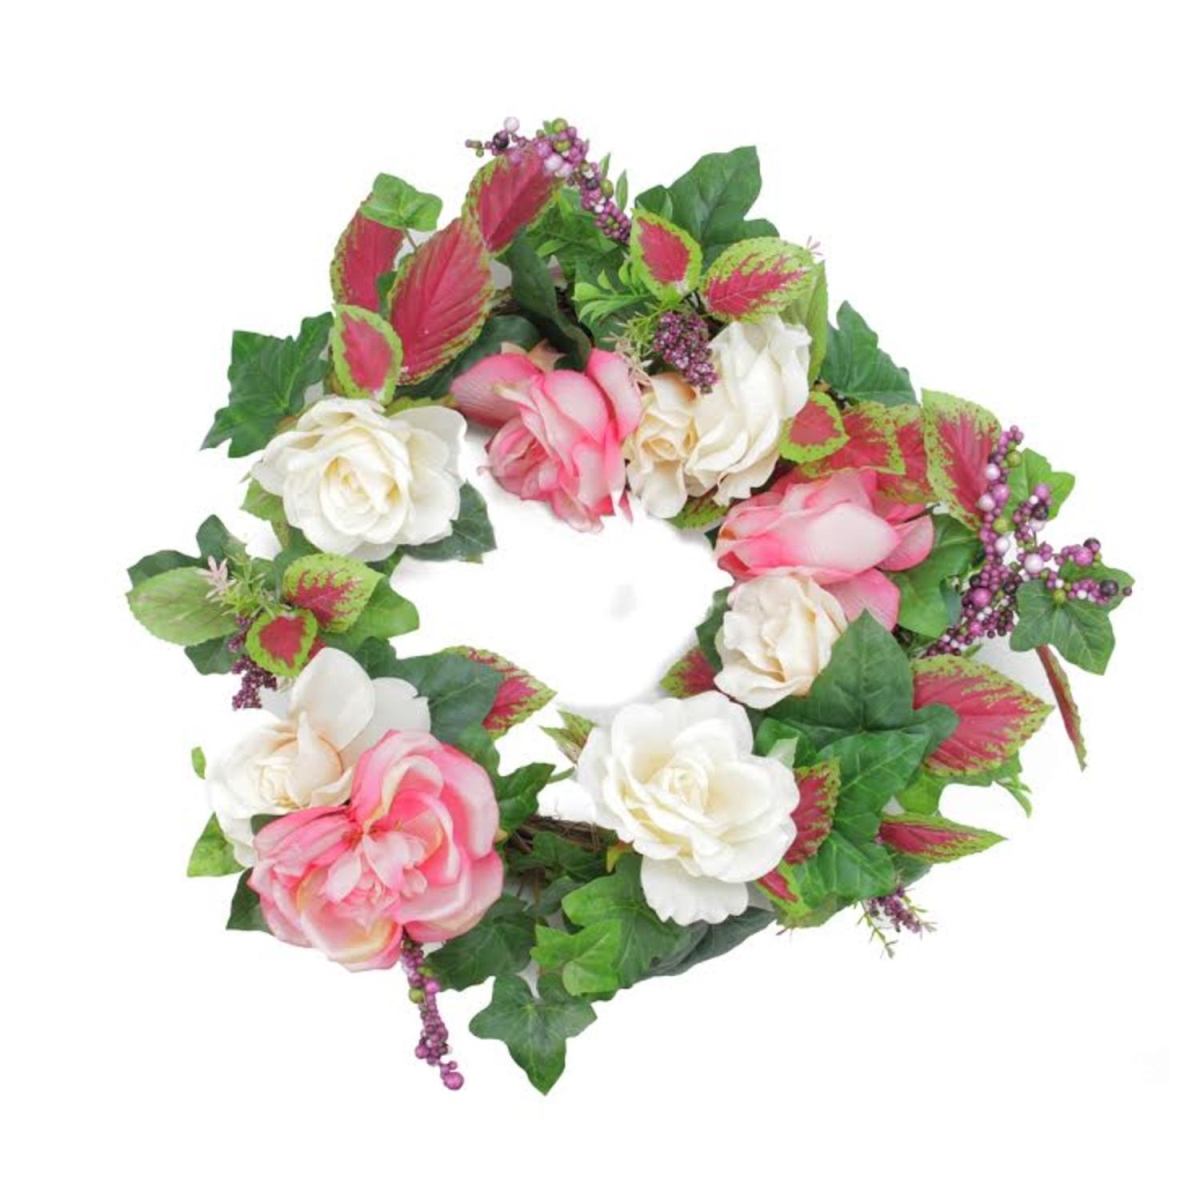 Picture of Darice 32038122 22.5 in. Decorative Cream & Pink Rose Flowers & Berries Artificial Spring Floral Wreath